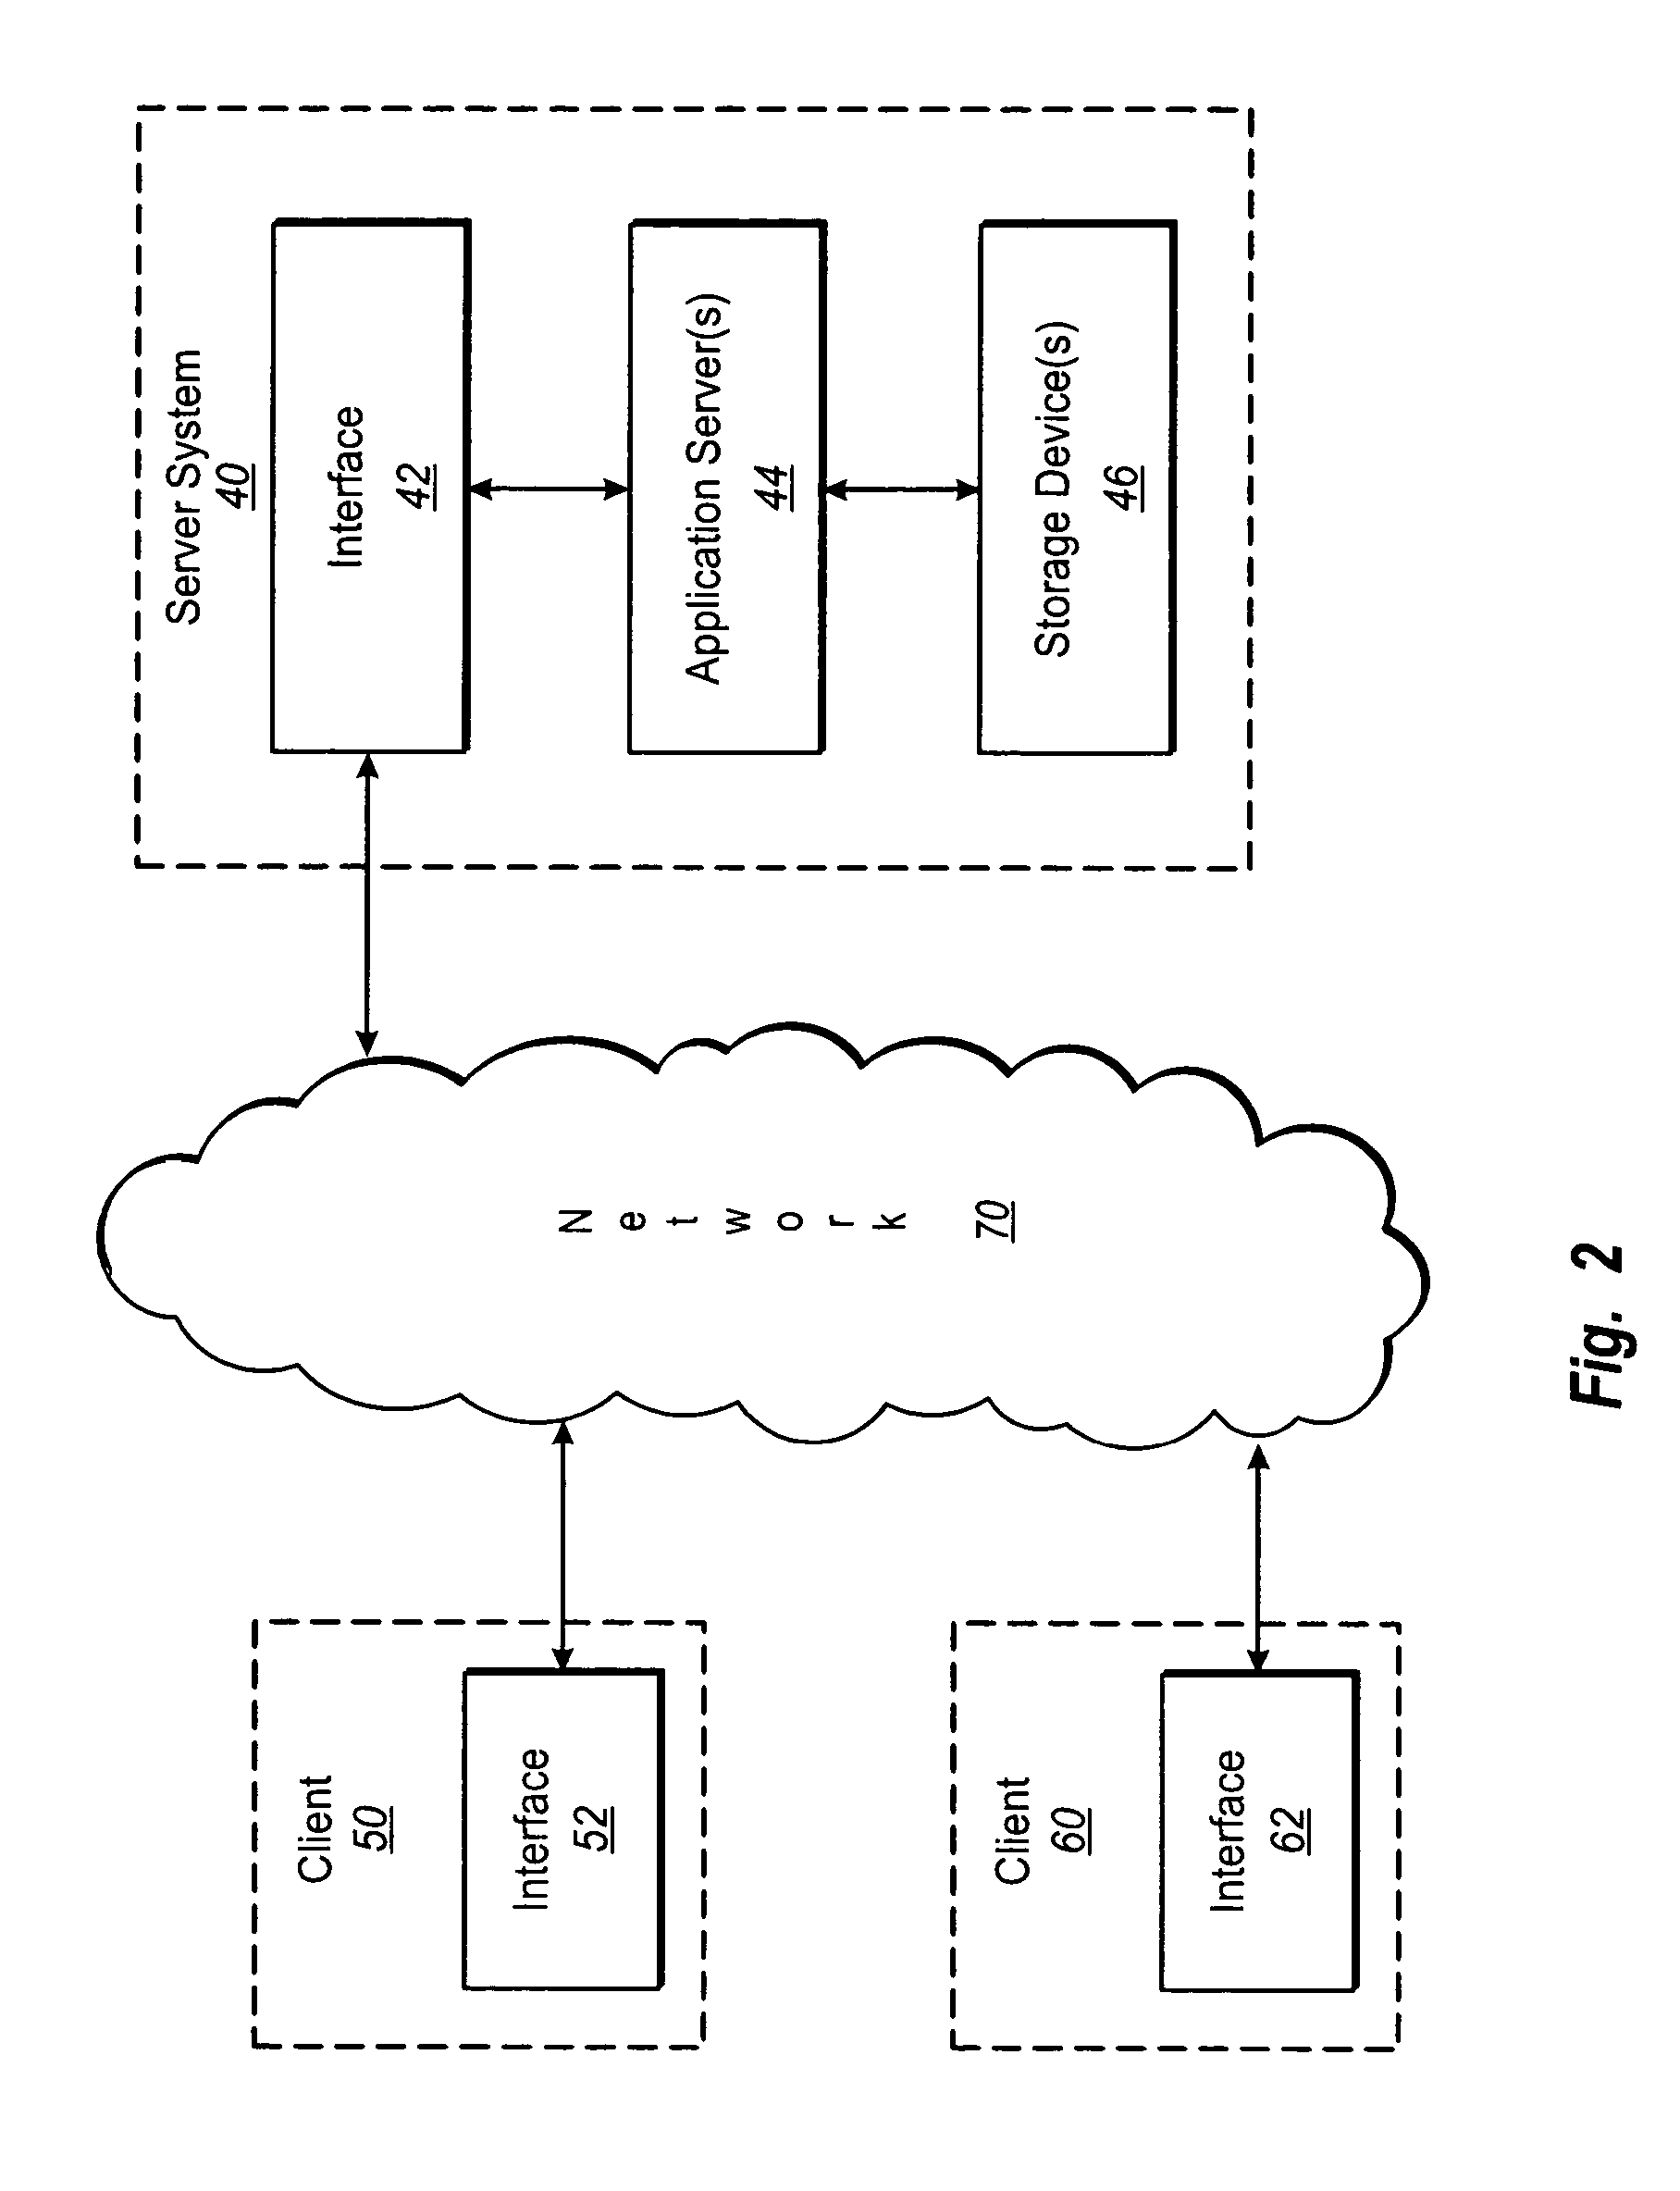 Systems and methods for dynamically analyzing temporality in speech